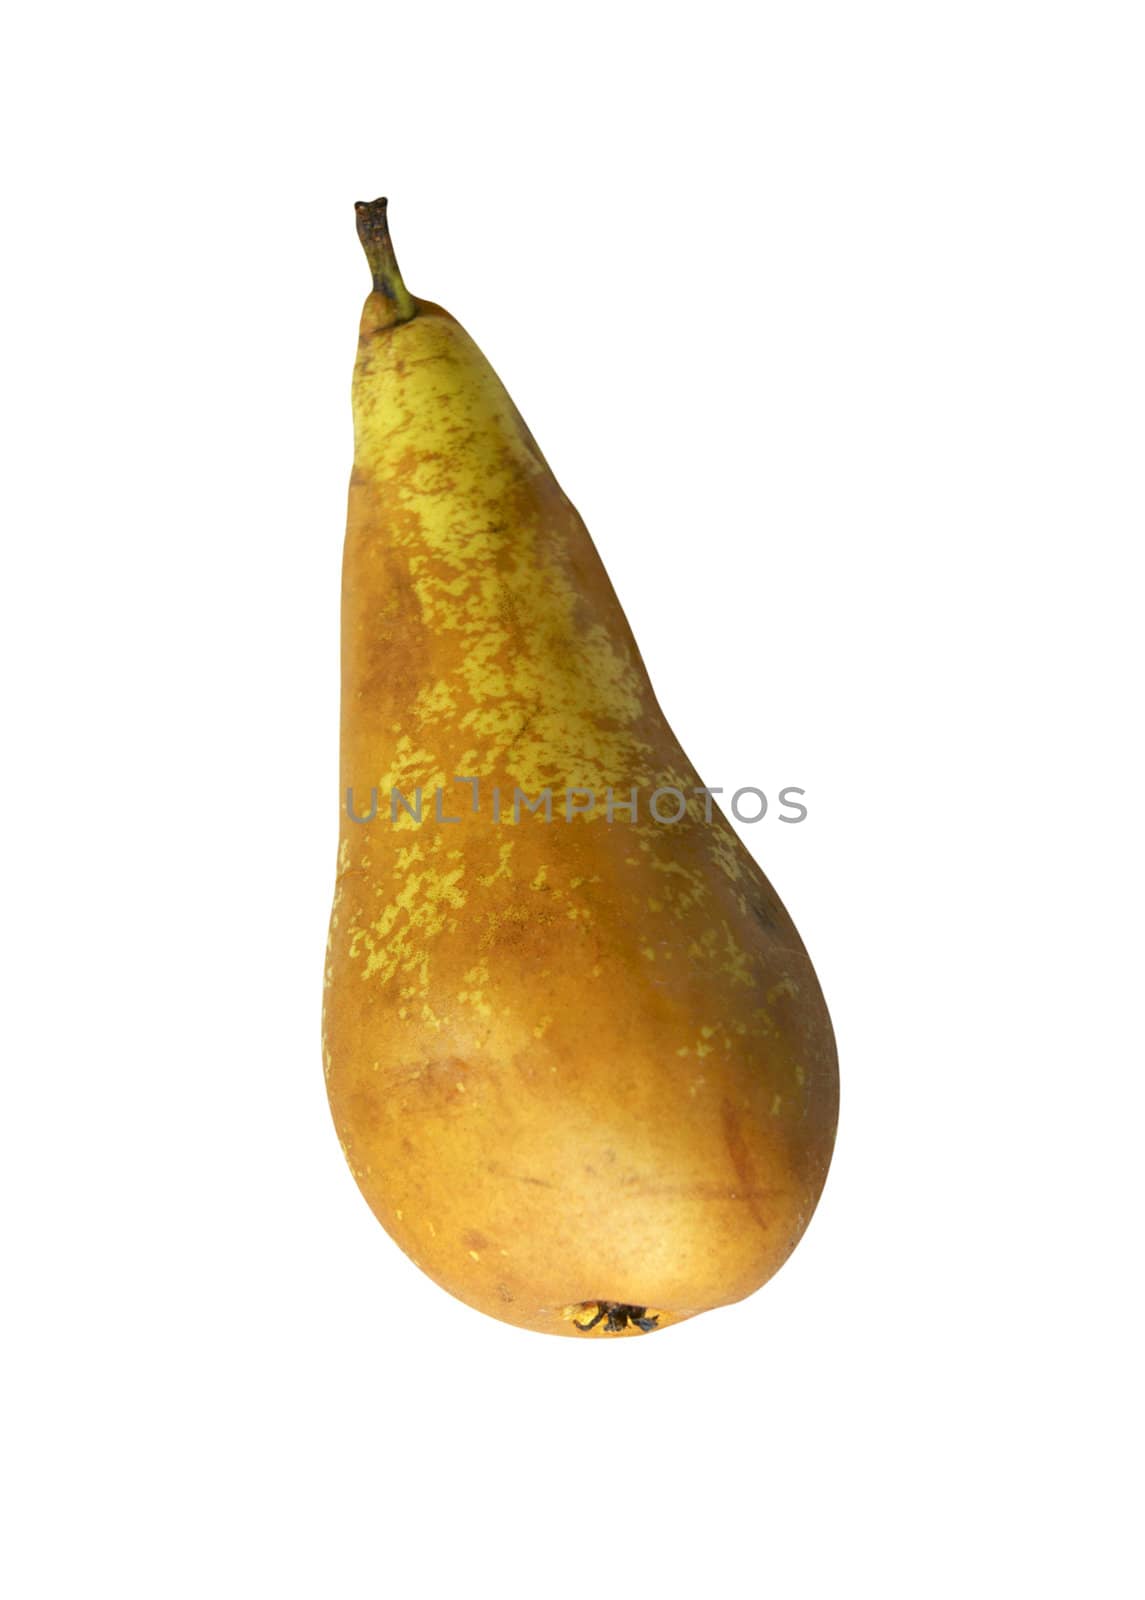 Ripe pear on white background is insulated